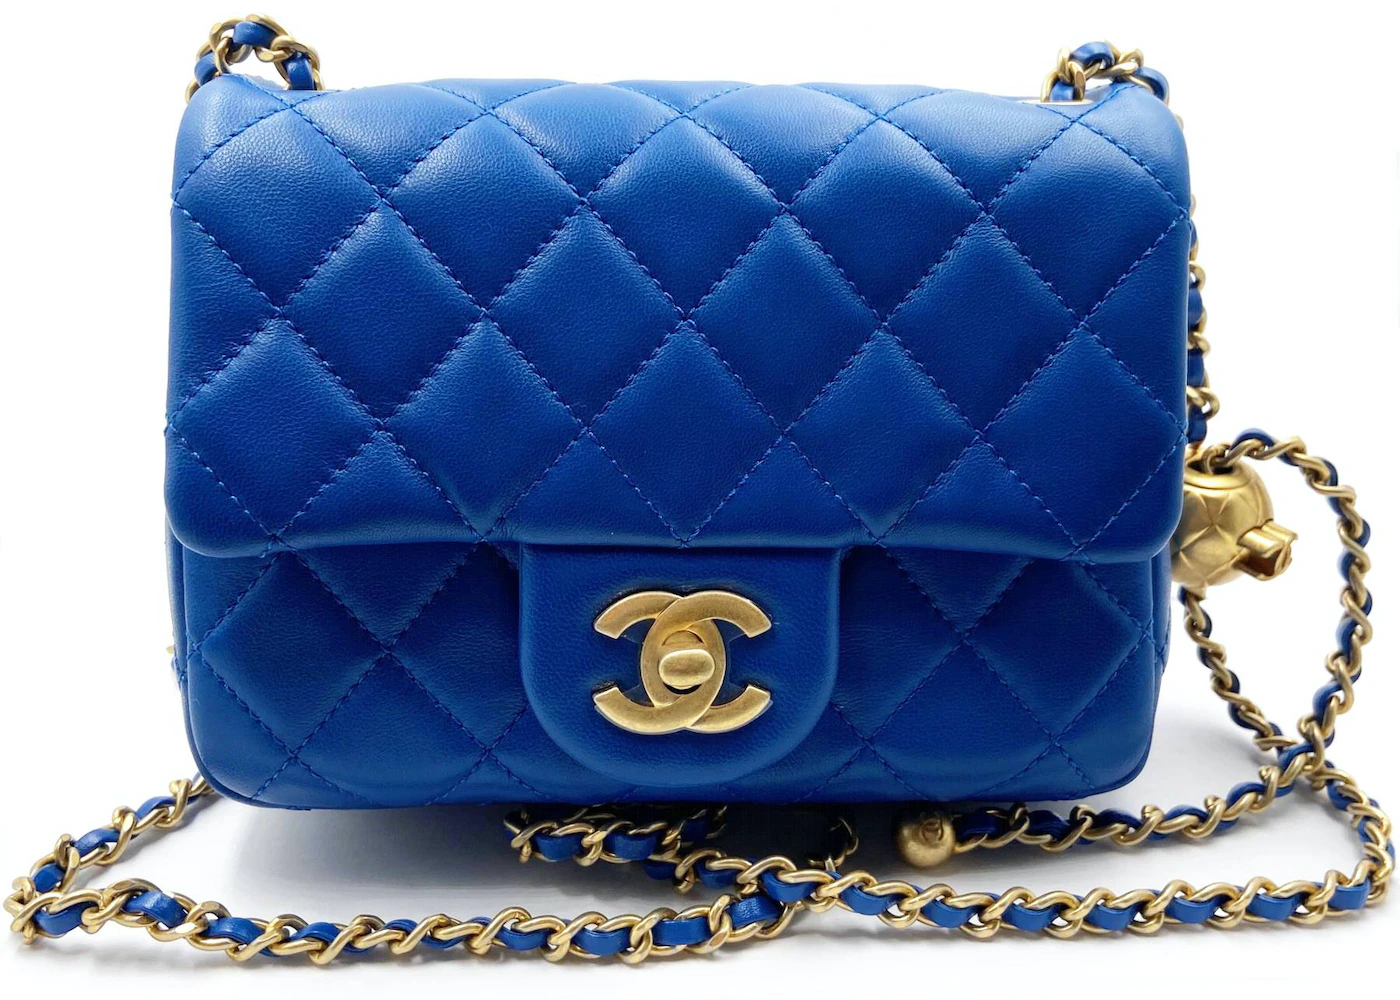 Chanel Pearl Crush denim woc with gold hardware